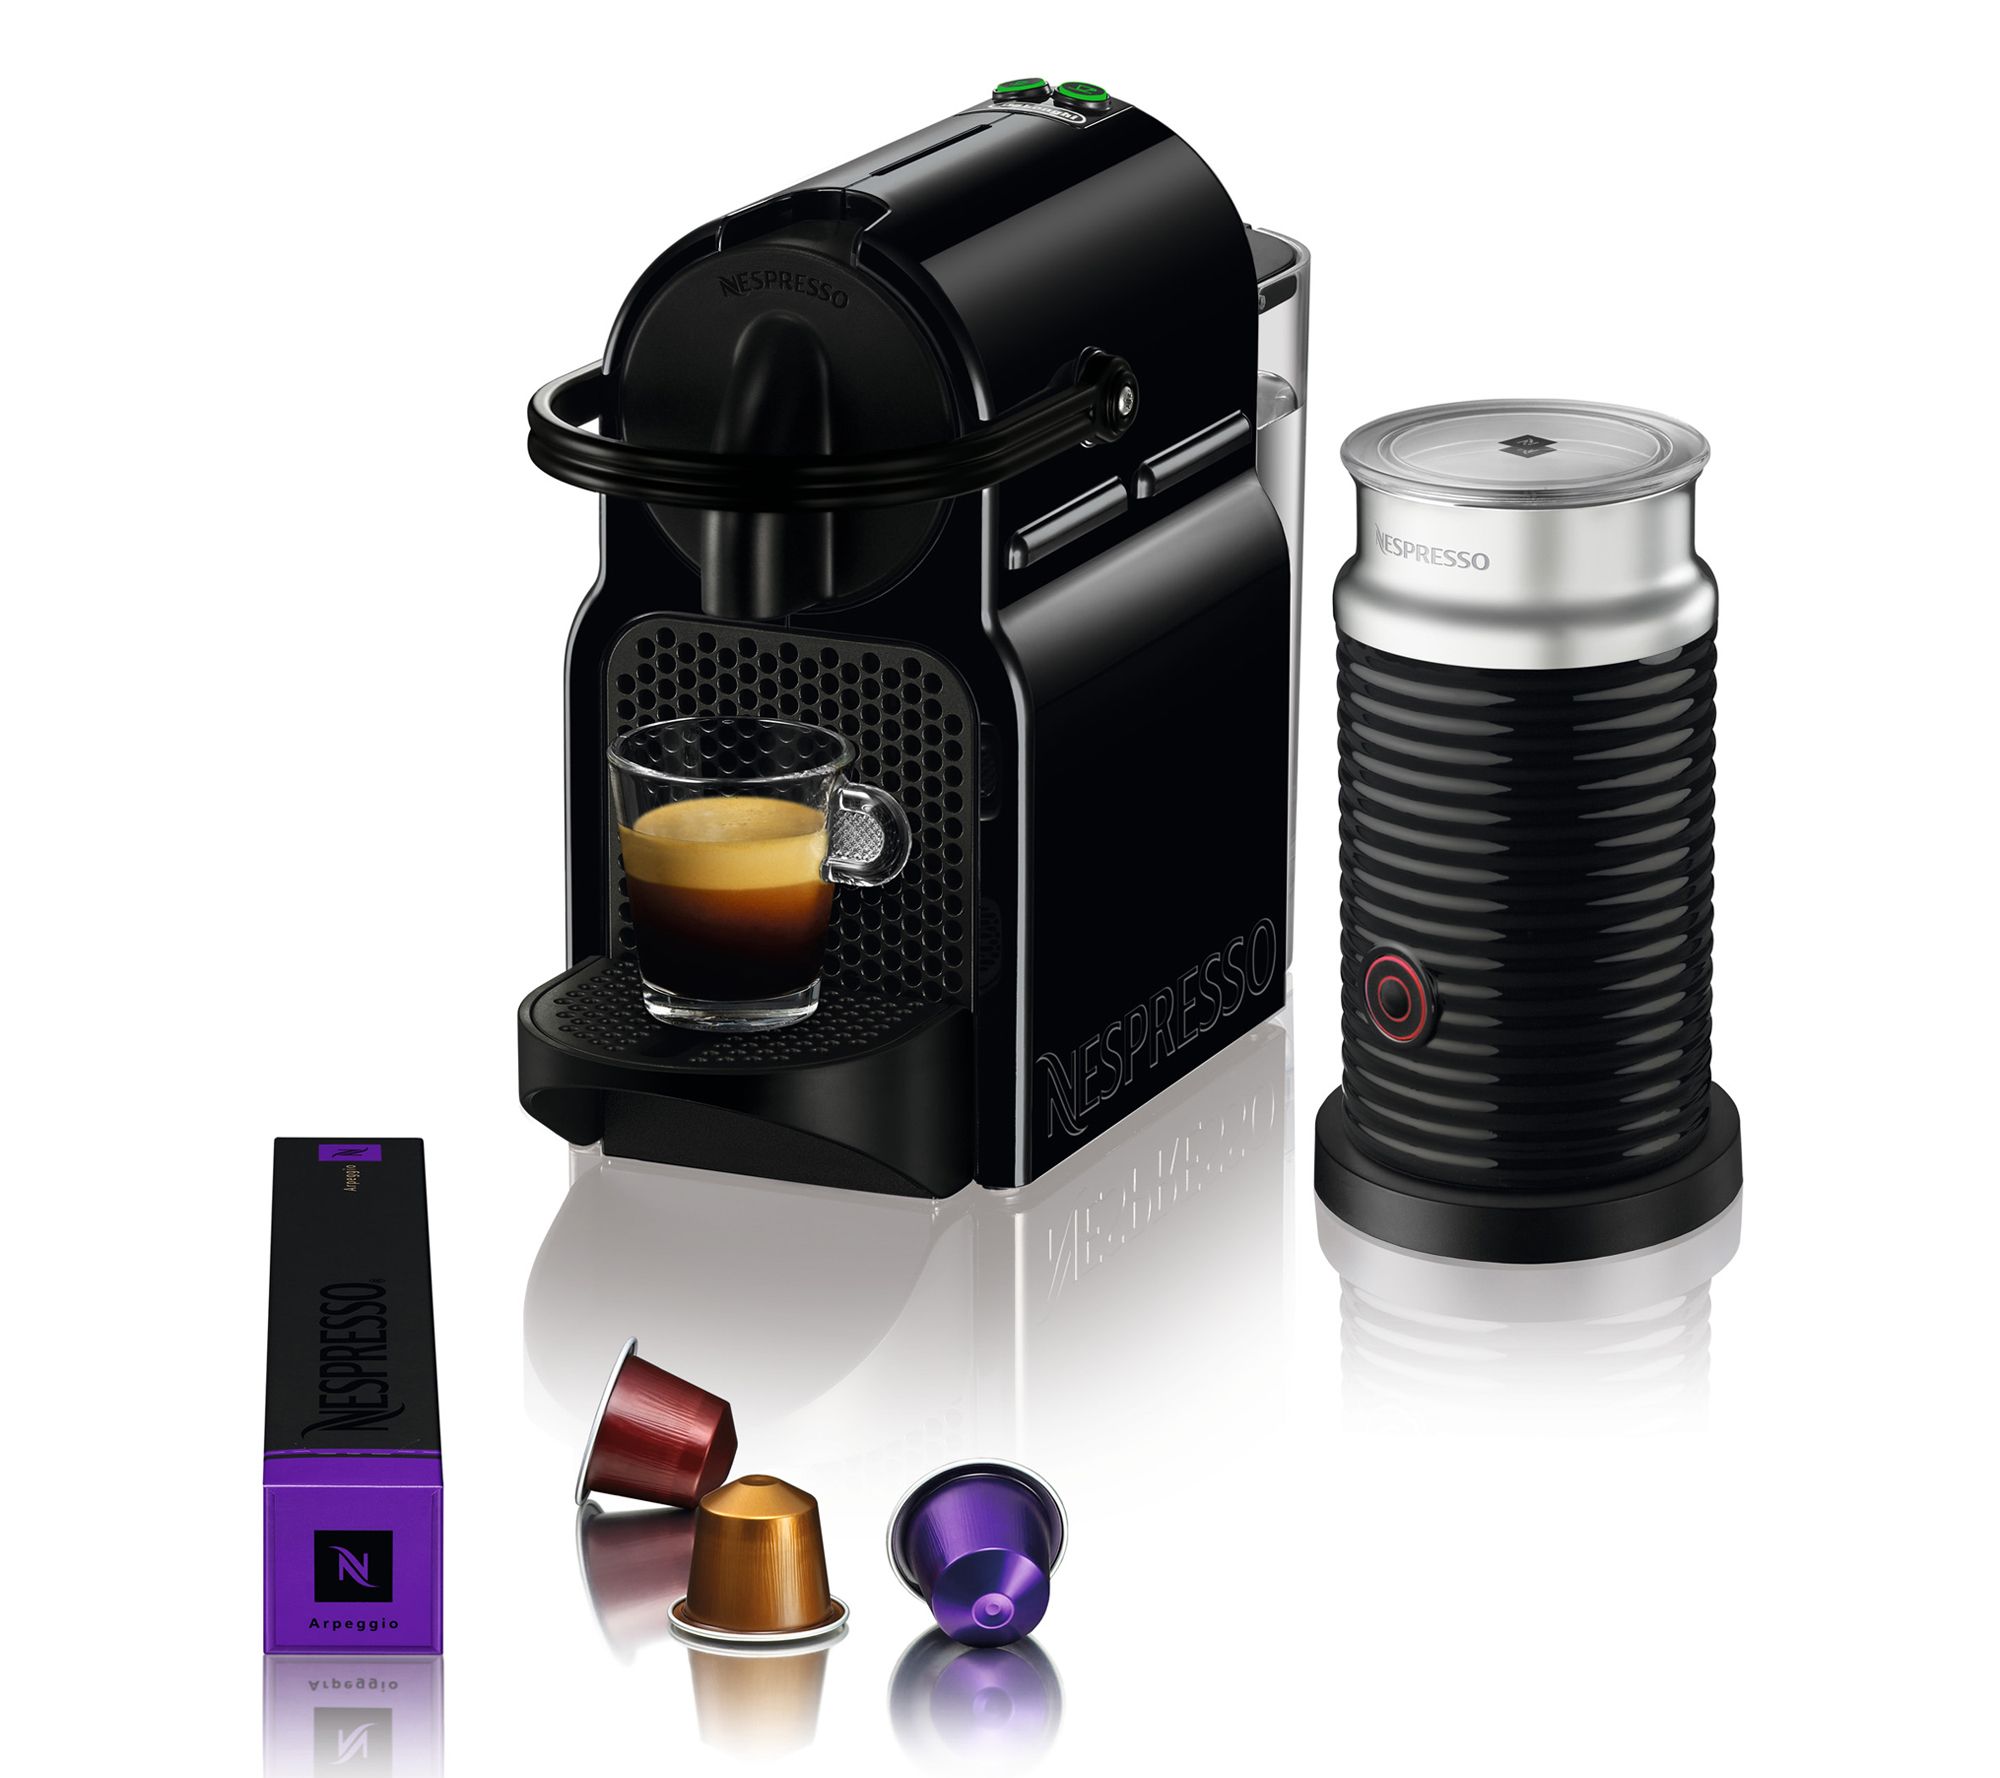 Nespresso Vertuo Next Review From A Daily Espresso Drinker